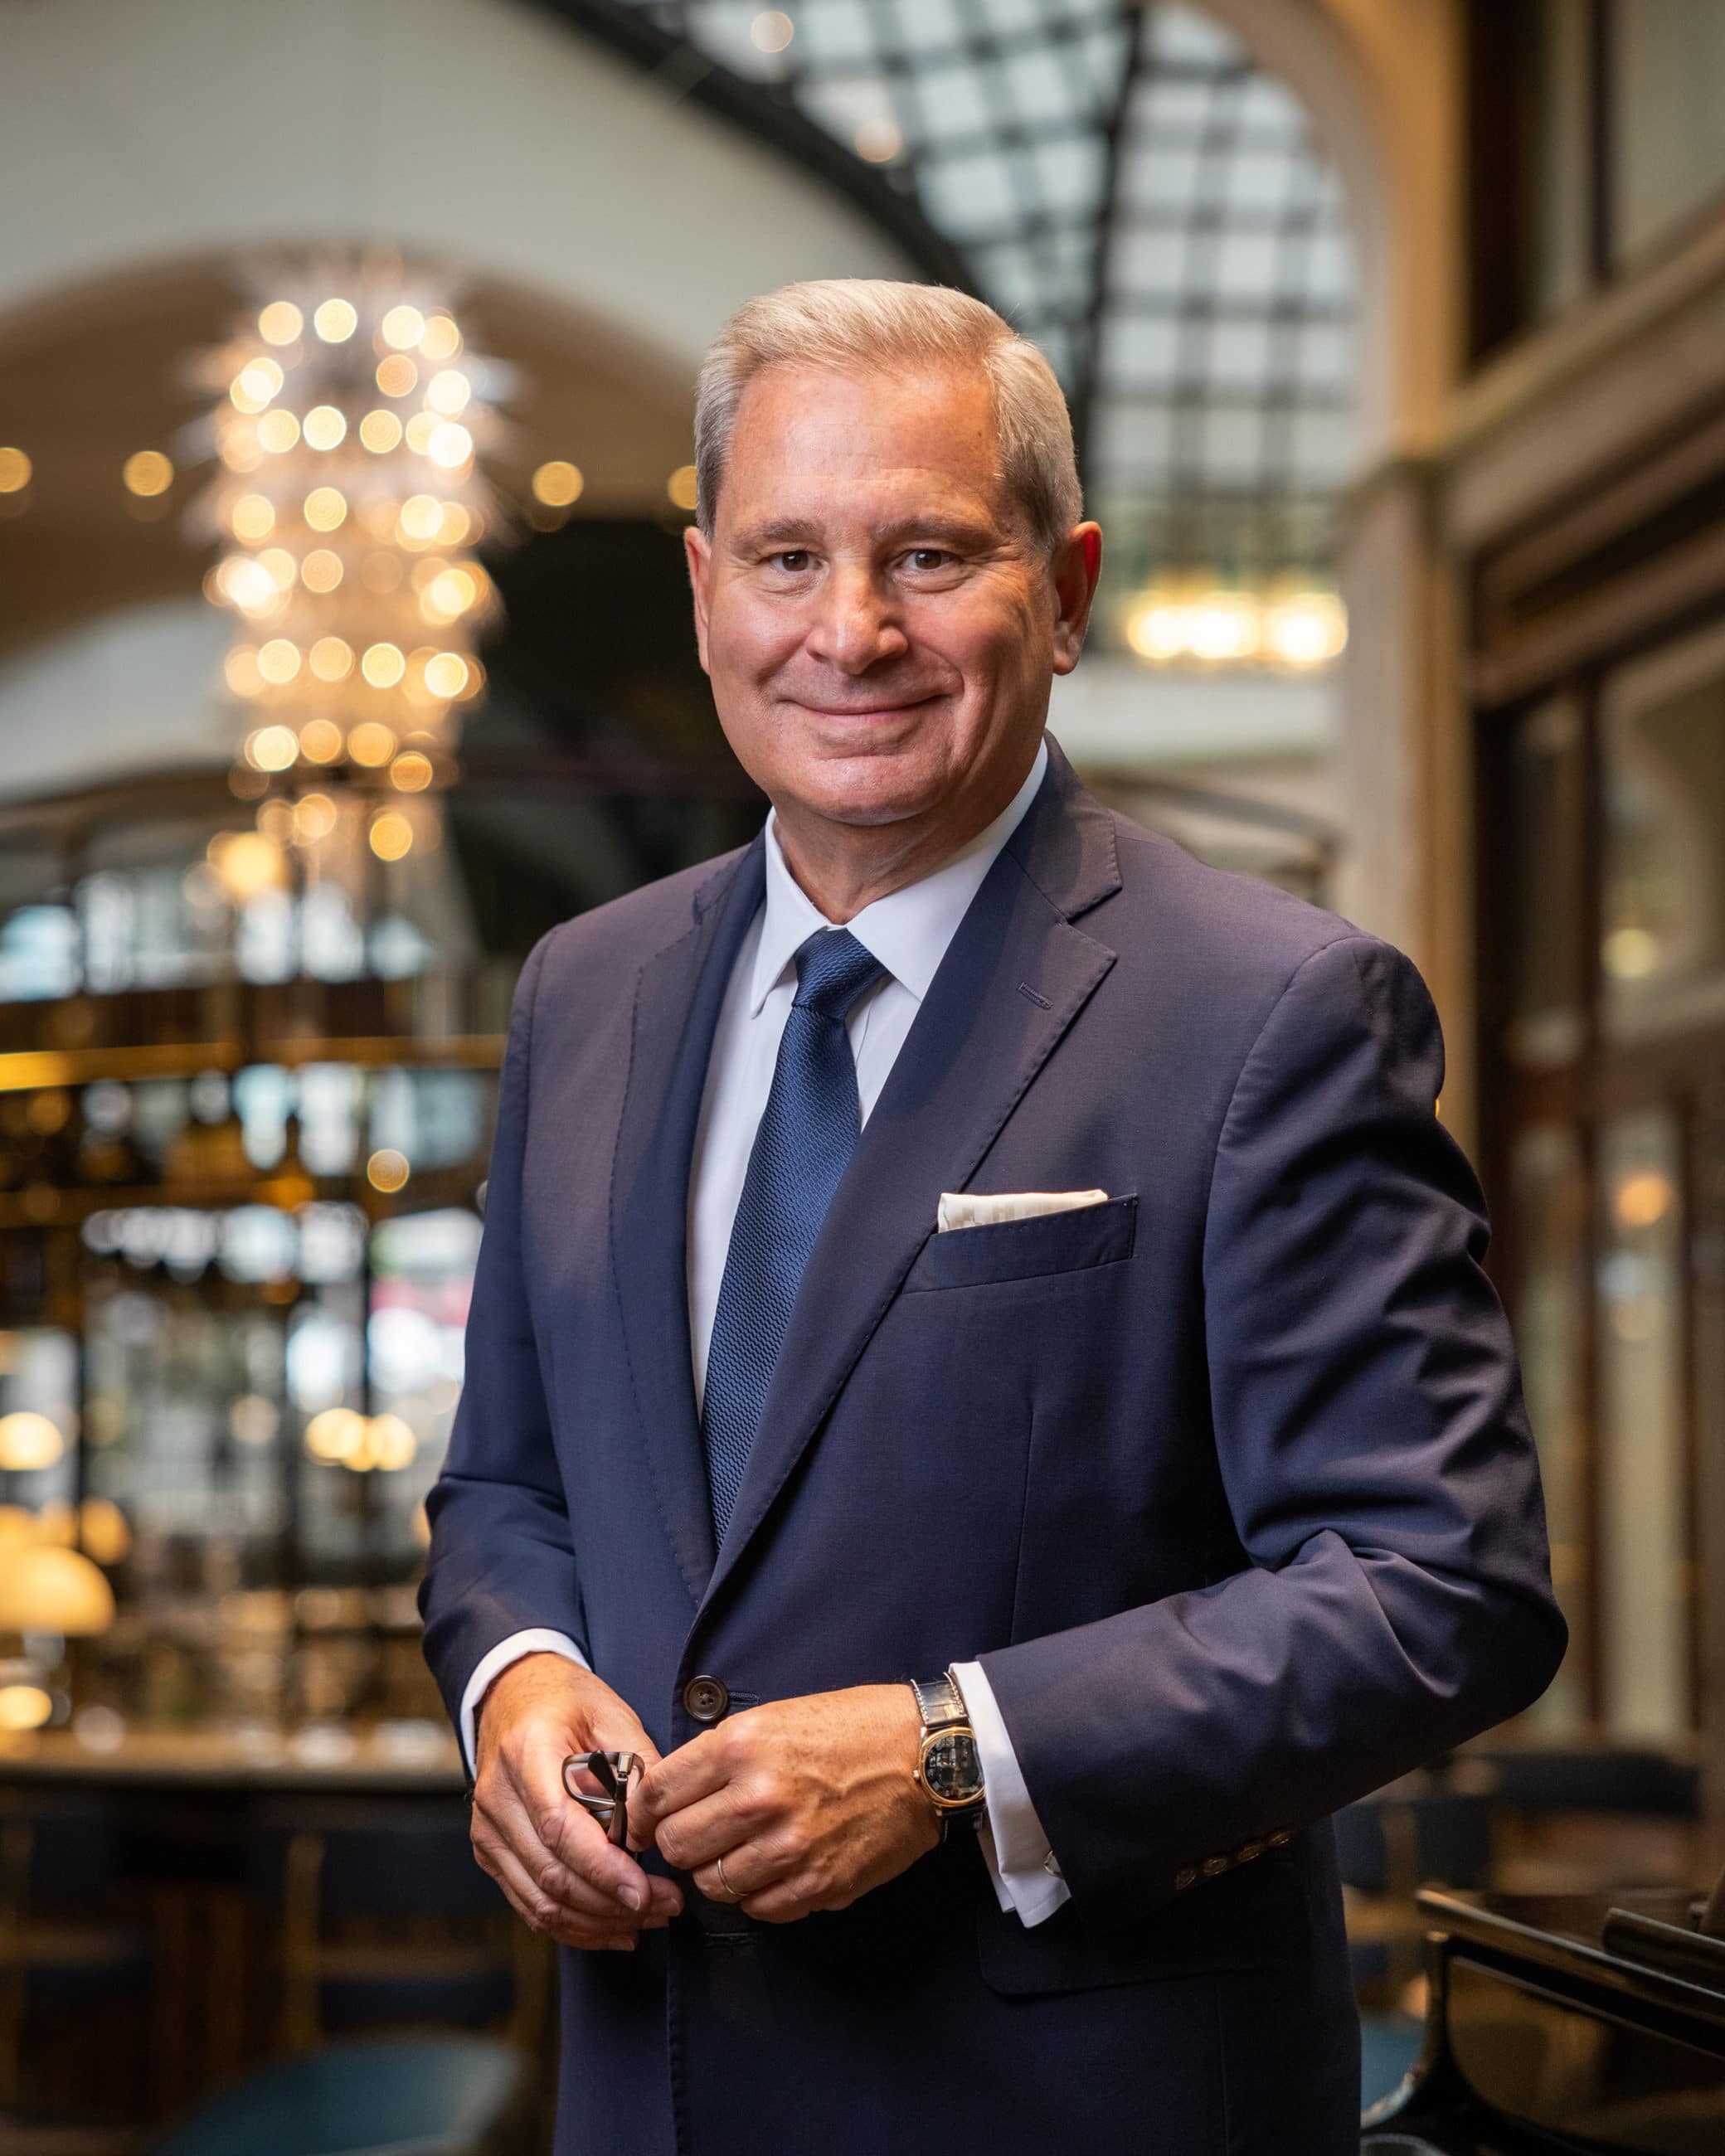 Xpat Interview Two: Yves Giacometti, General Manager, Four Seasons Hotel Gresham Palace Budapest